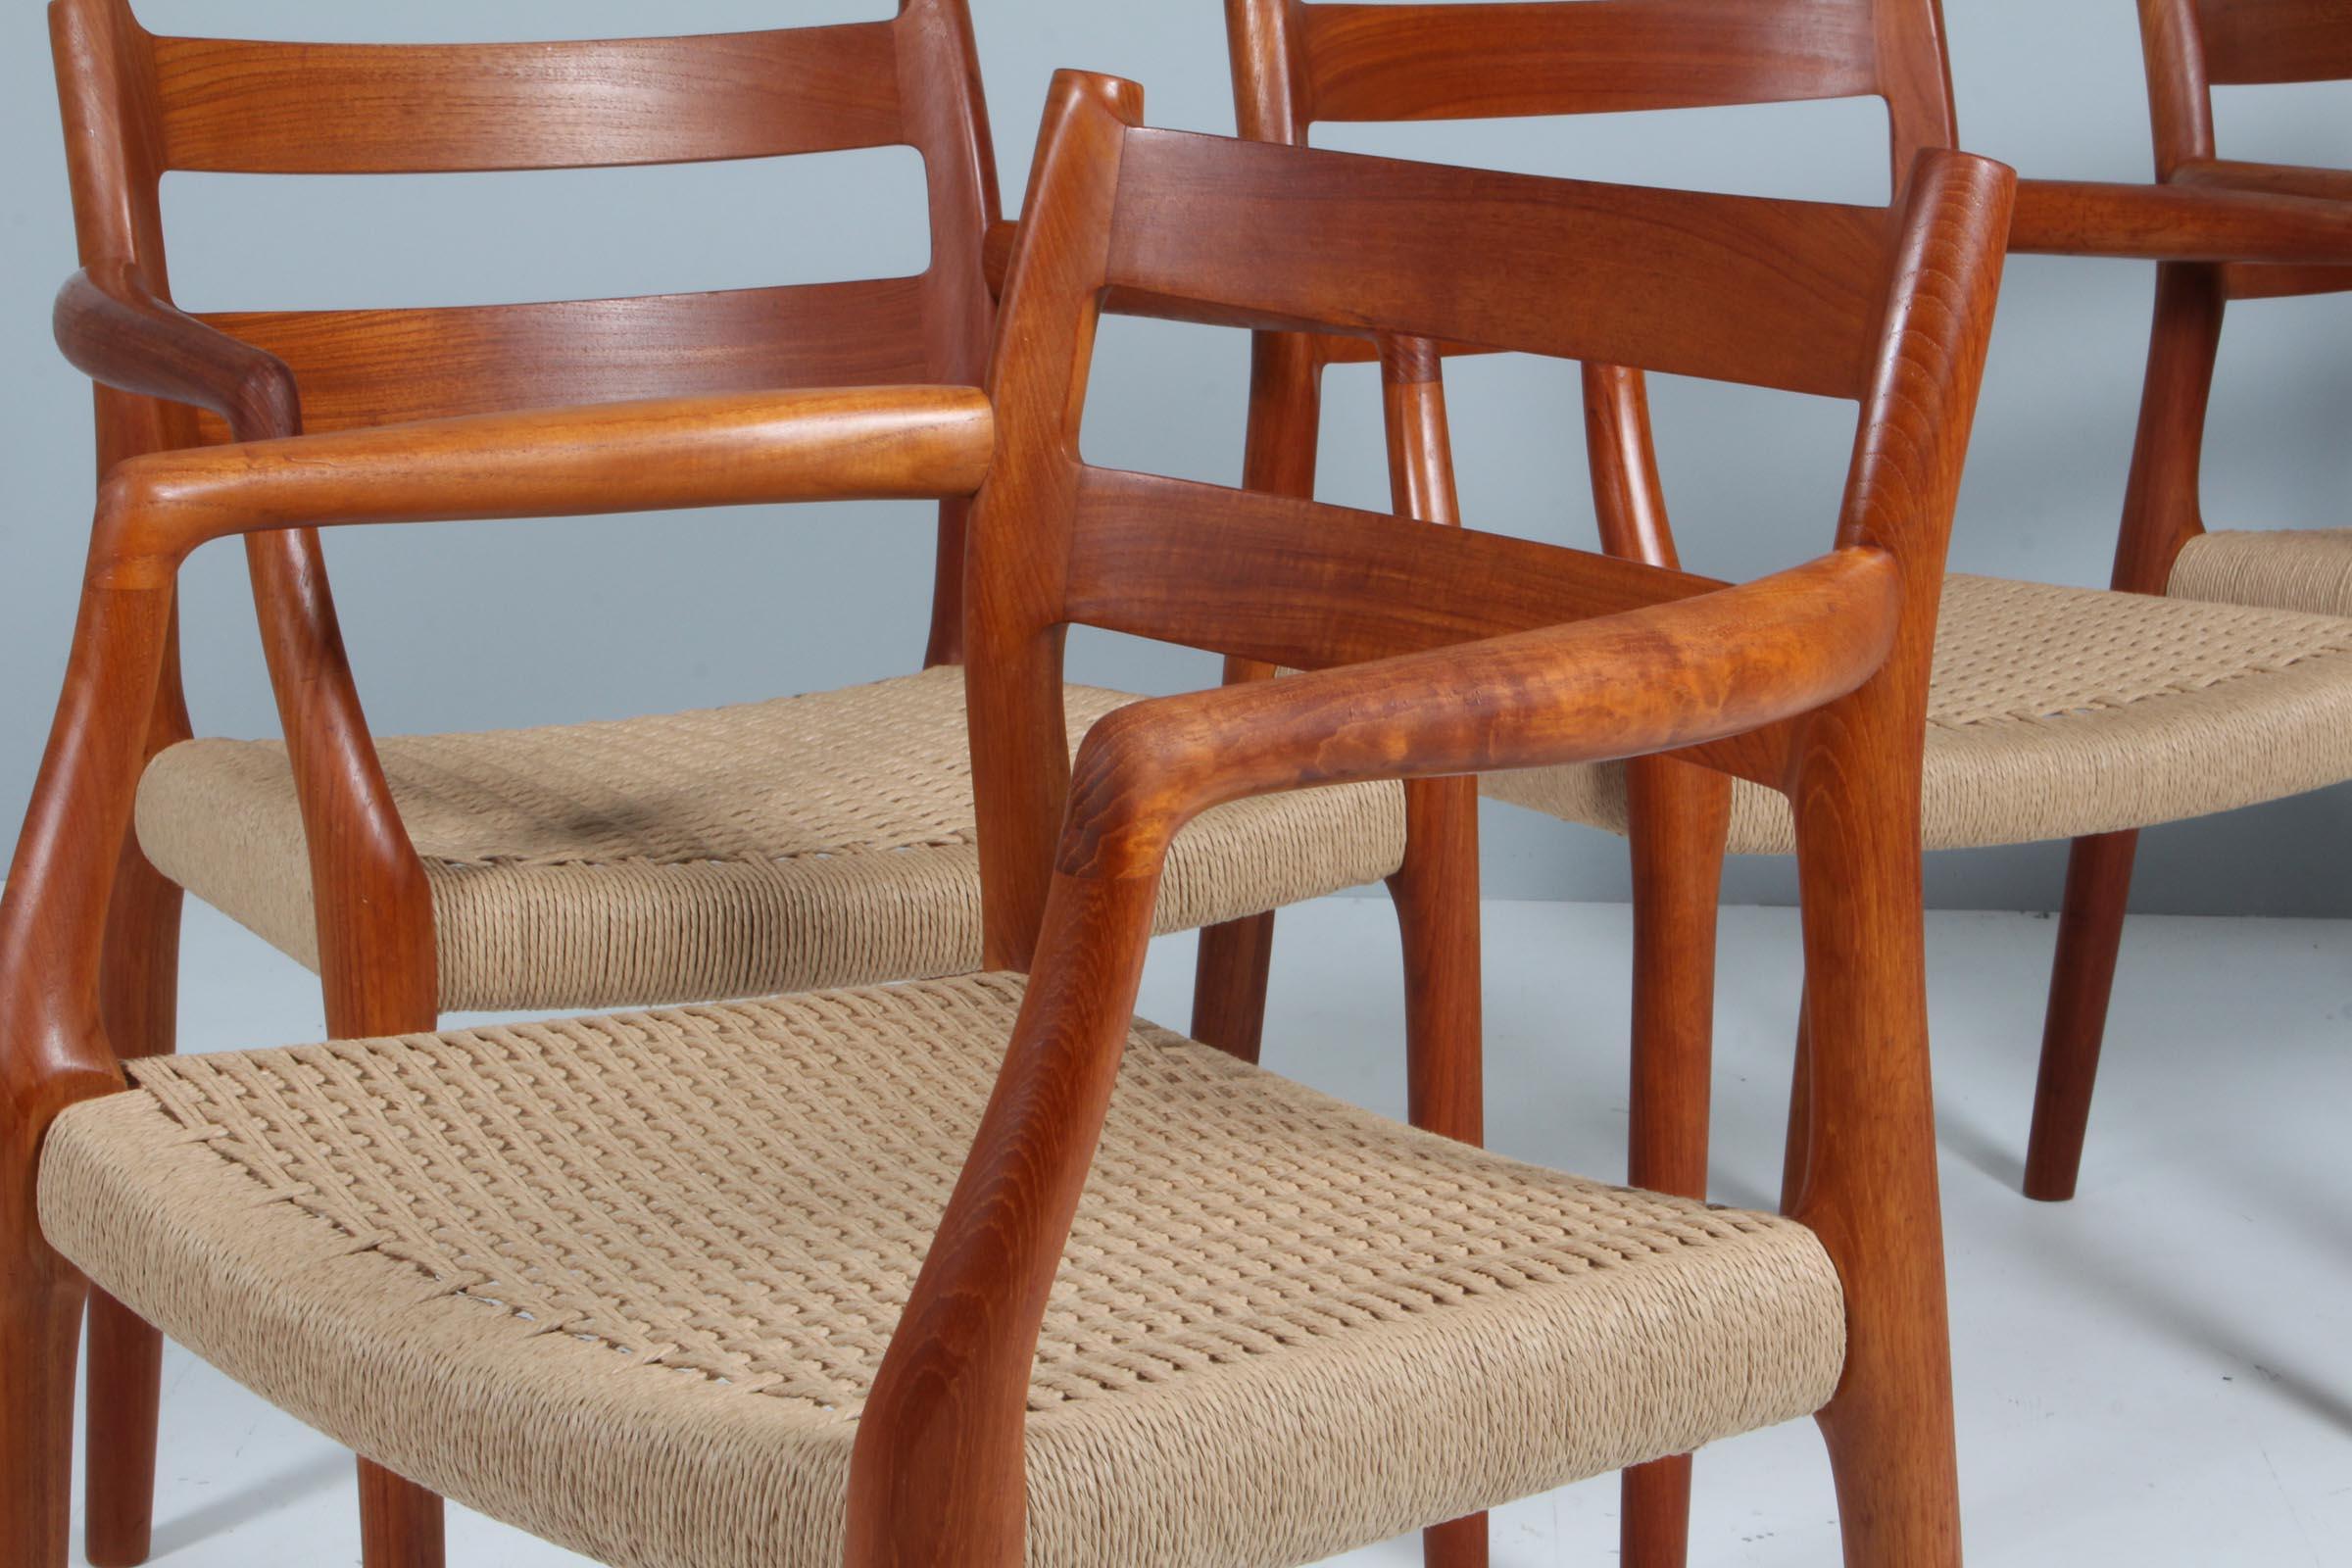 Mid-20th Century N. O. Møller Armchairs, model 67 in teak and papercord. Denmark 1960s